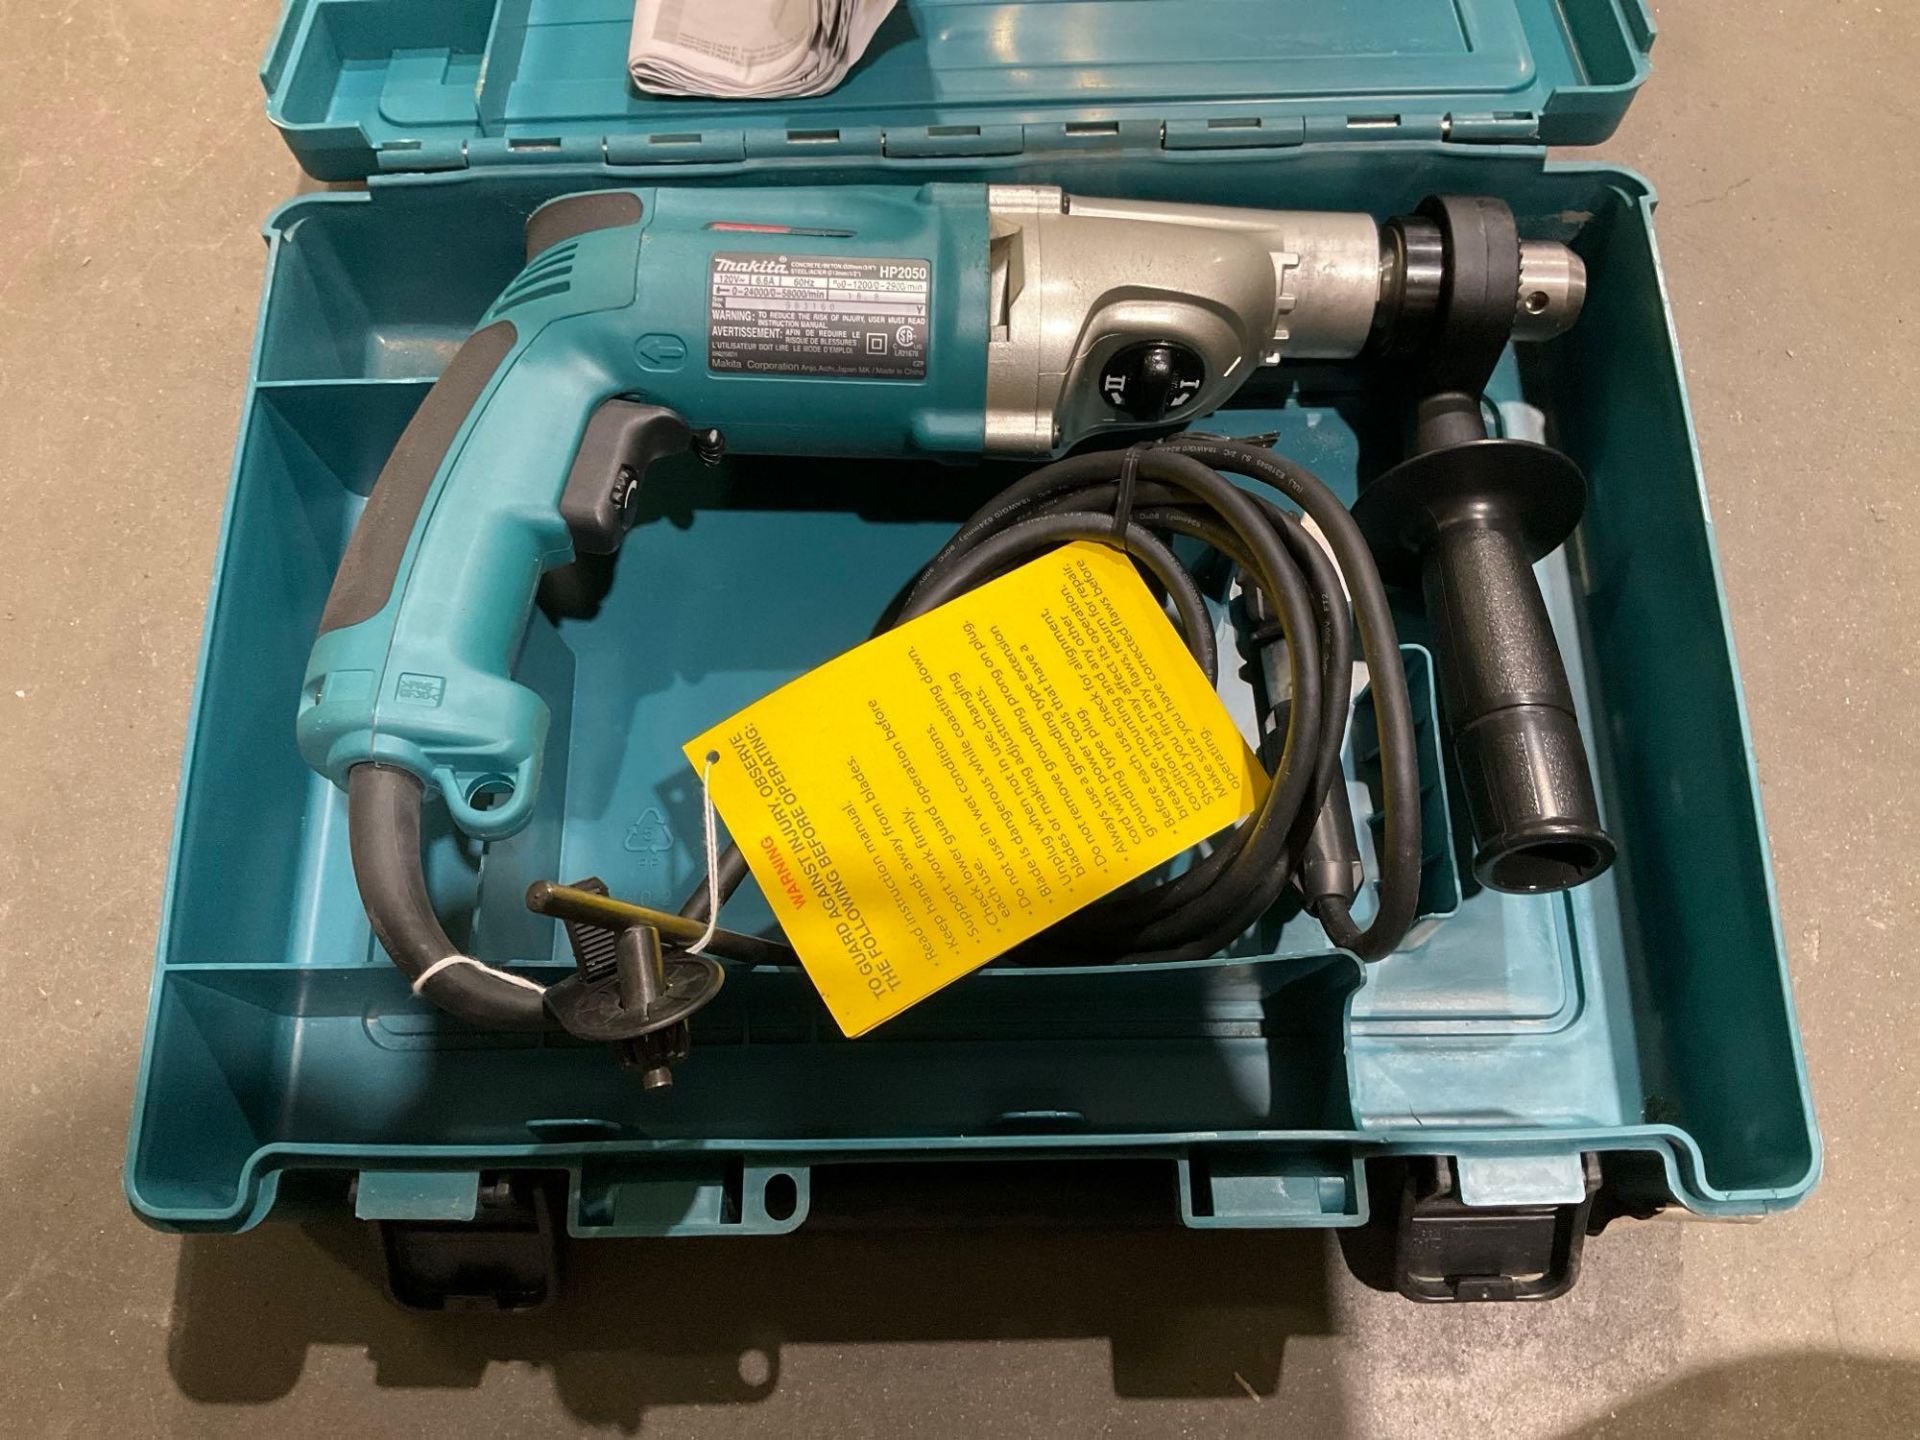 MAKITA 2 SPEED HAMMER DRILL MODEL HP2050 WITH CARRYING CASE , 120VOLTS, 6.6A, INSTRUCTION MANUAL ... - Image 2 of 4